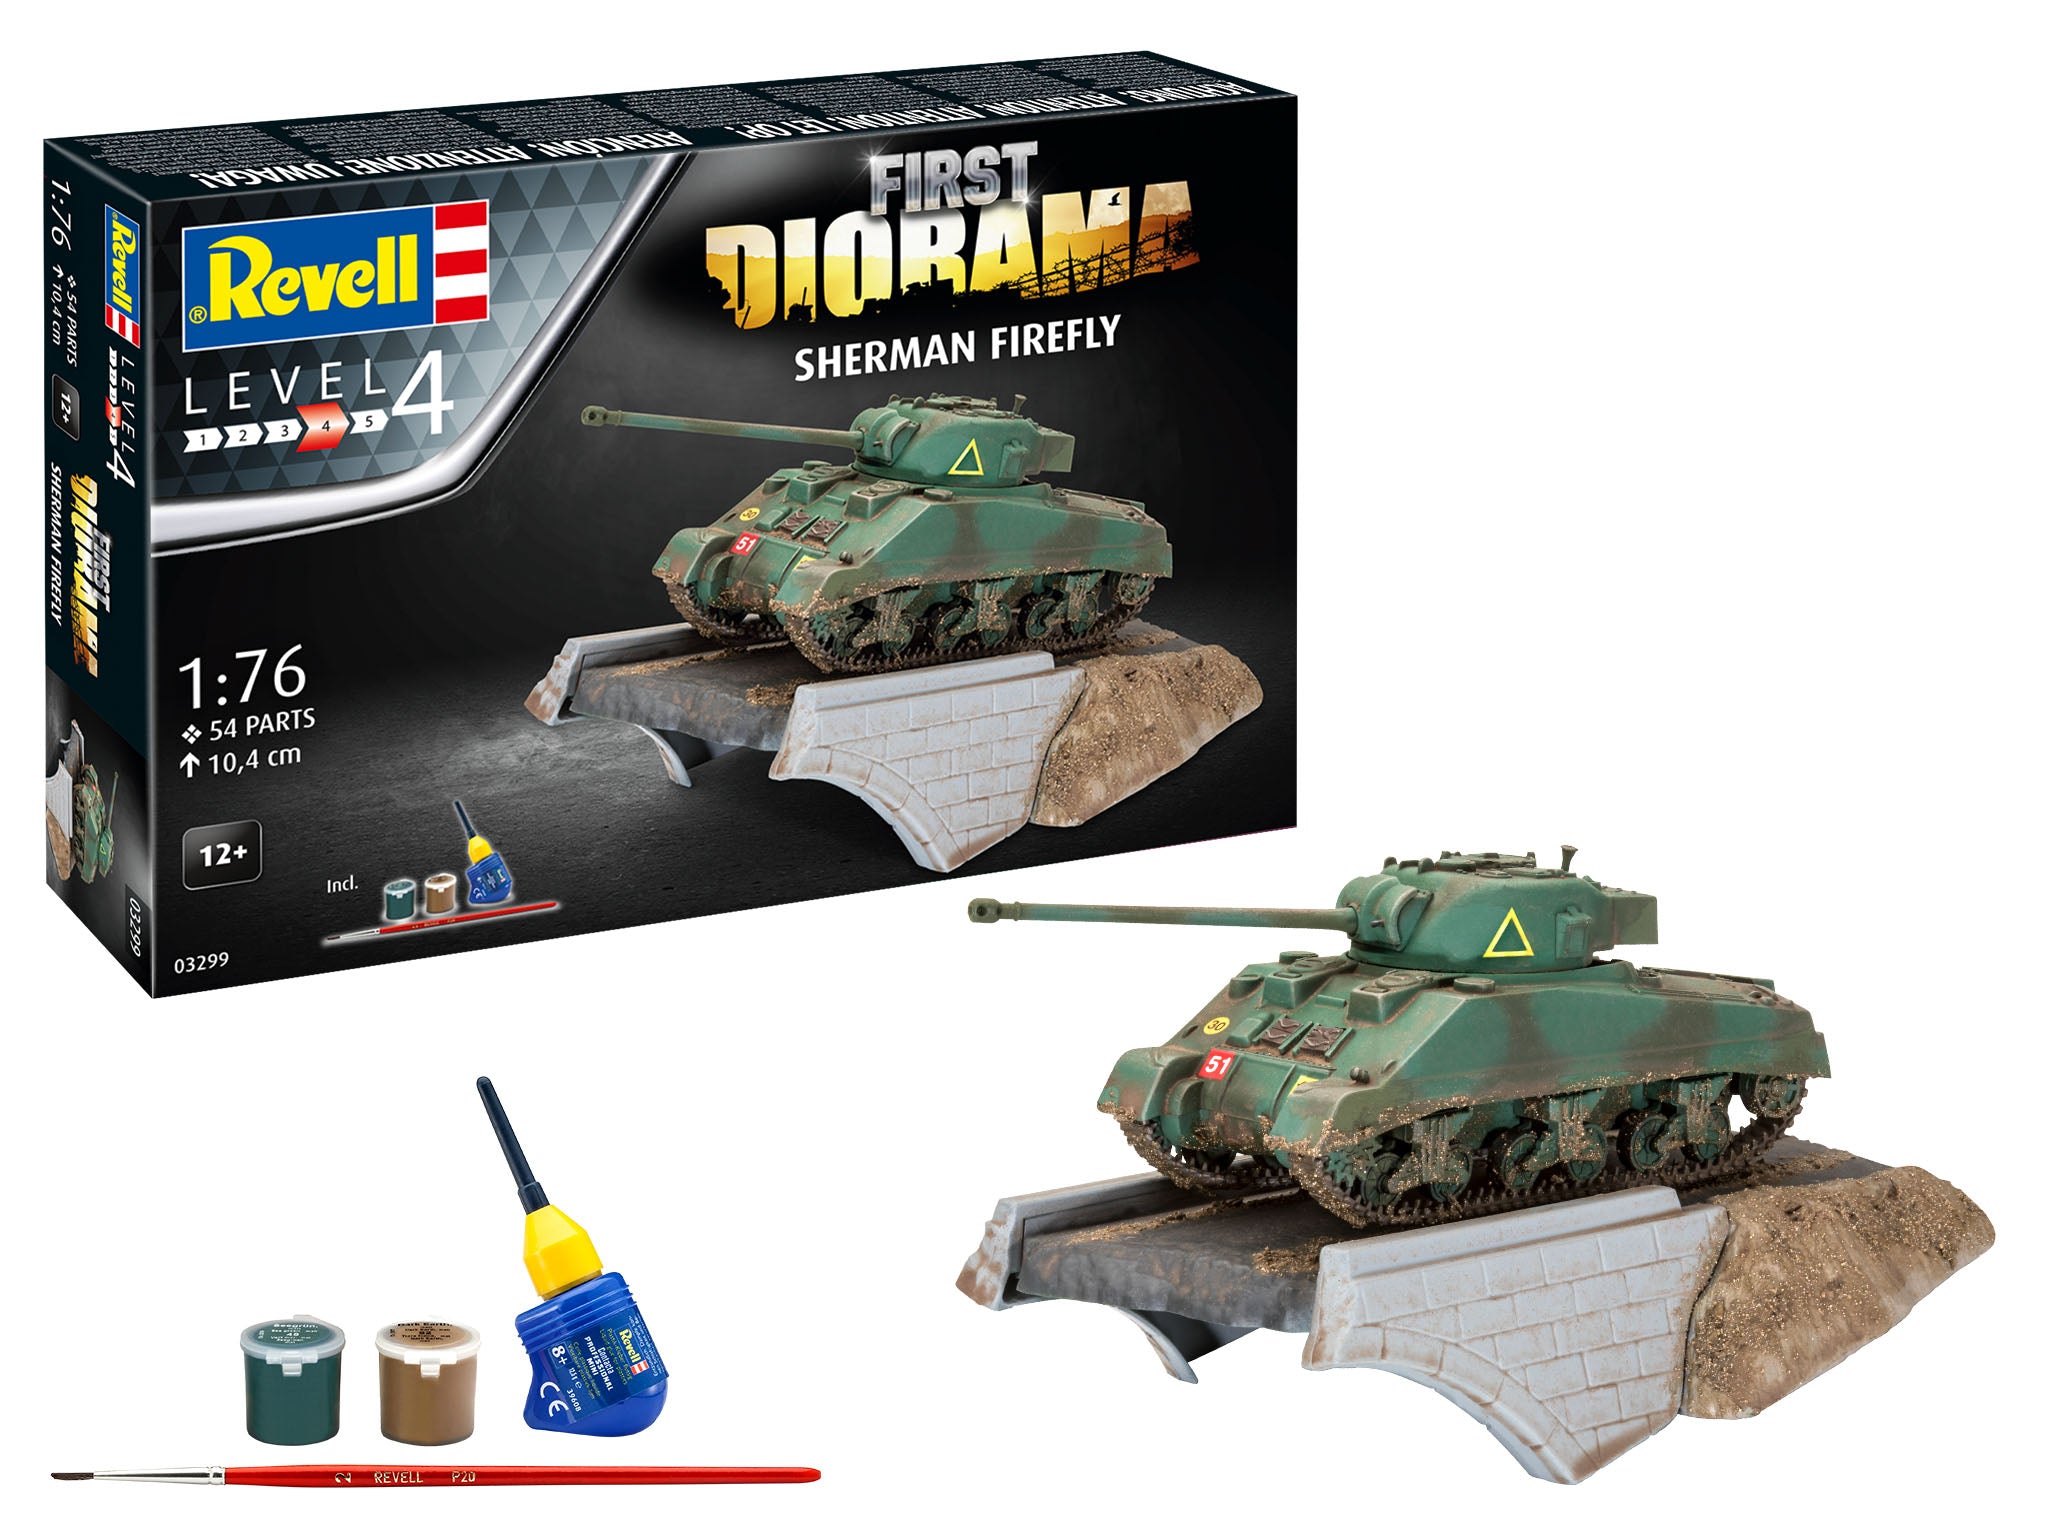 REVELL FIRST DIORAMA SET - SHERMAN FIREFLY 1:76 Scale 03299